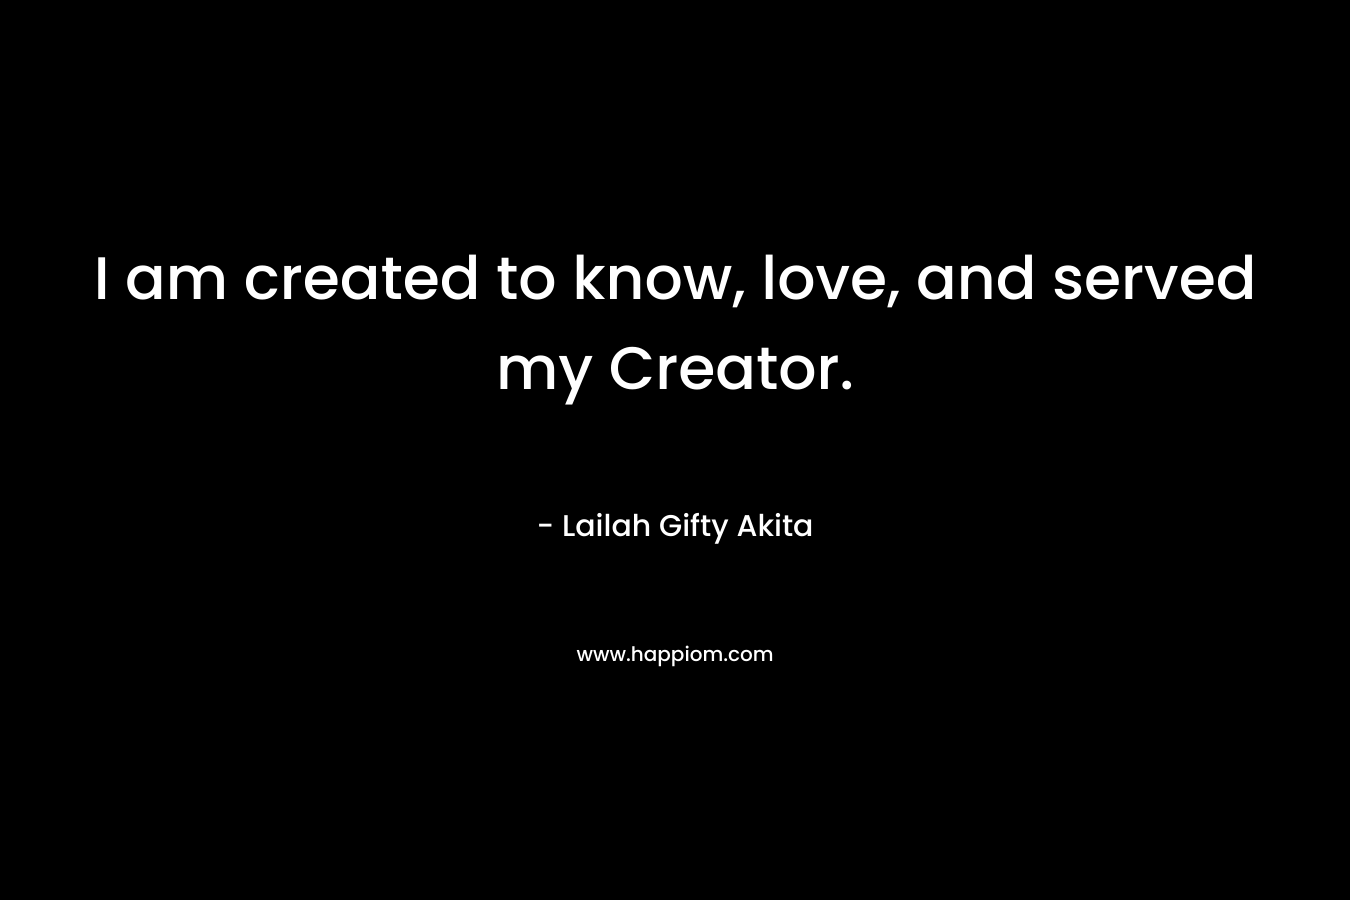 I am created to know, love, and served my Creator.